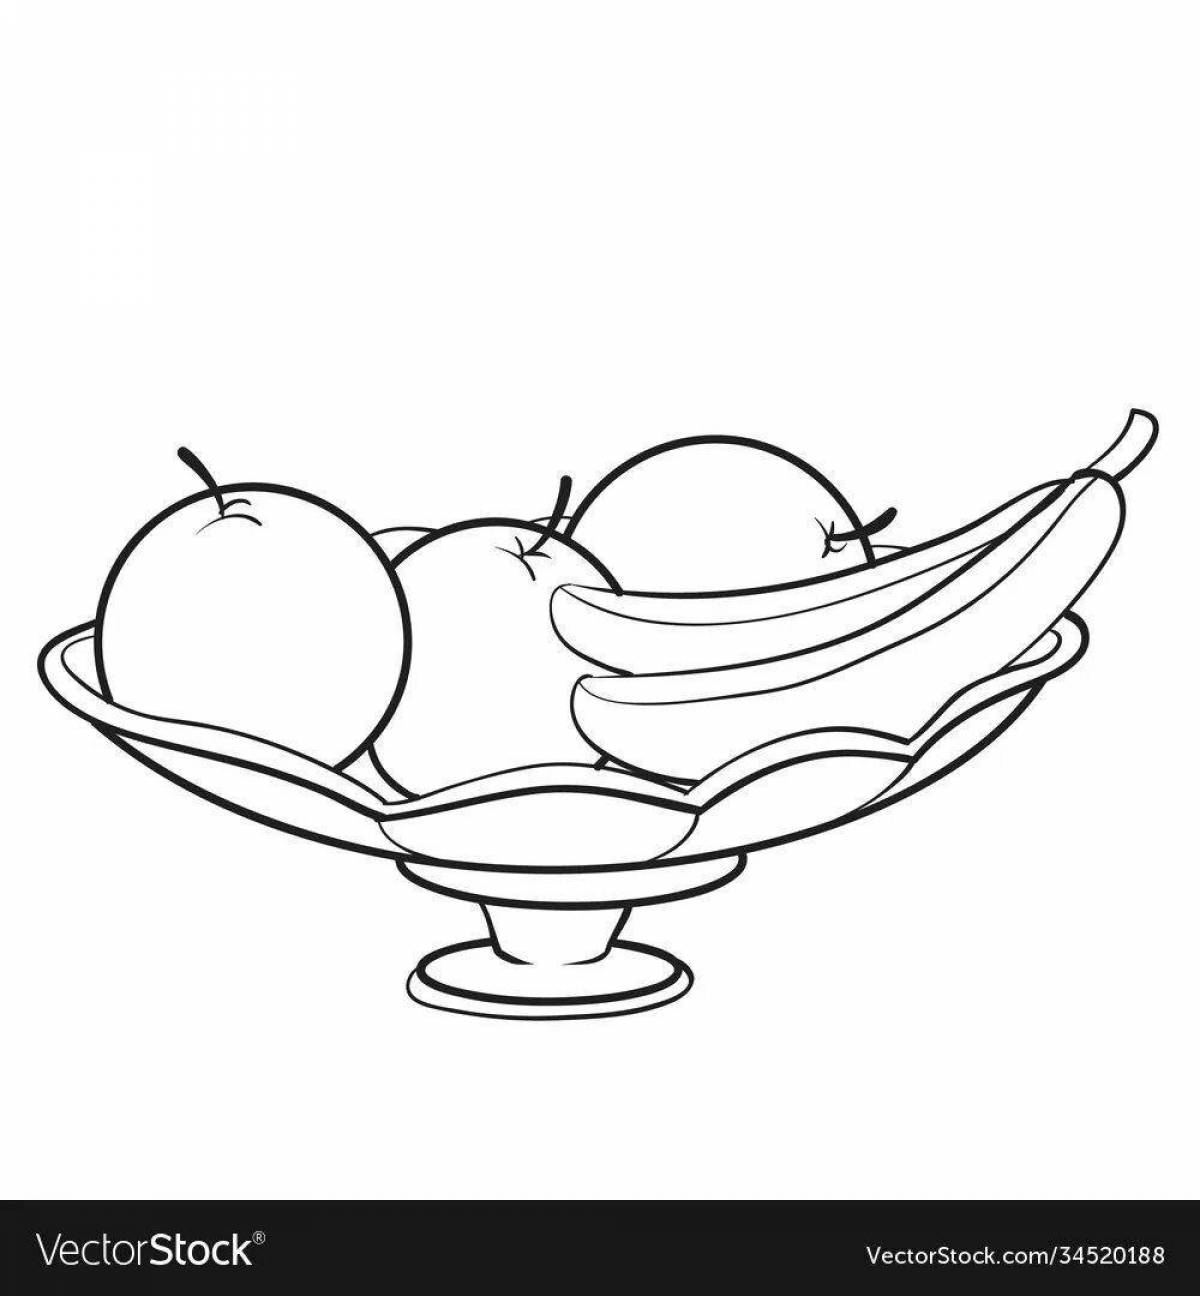 Coloring book inviting fruit plate